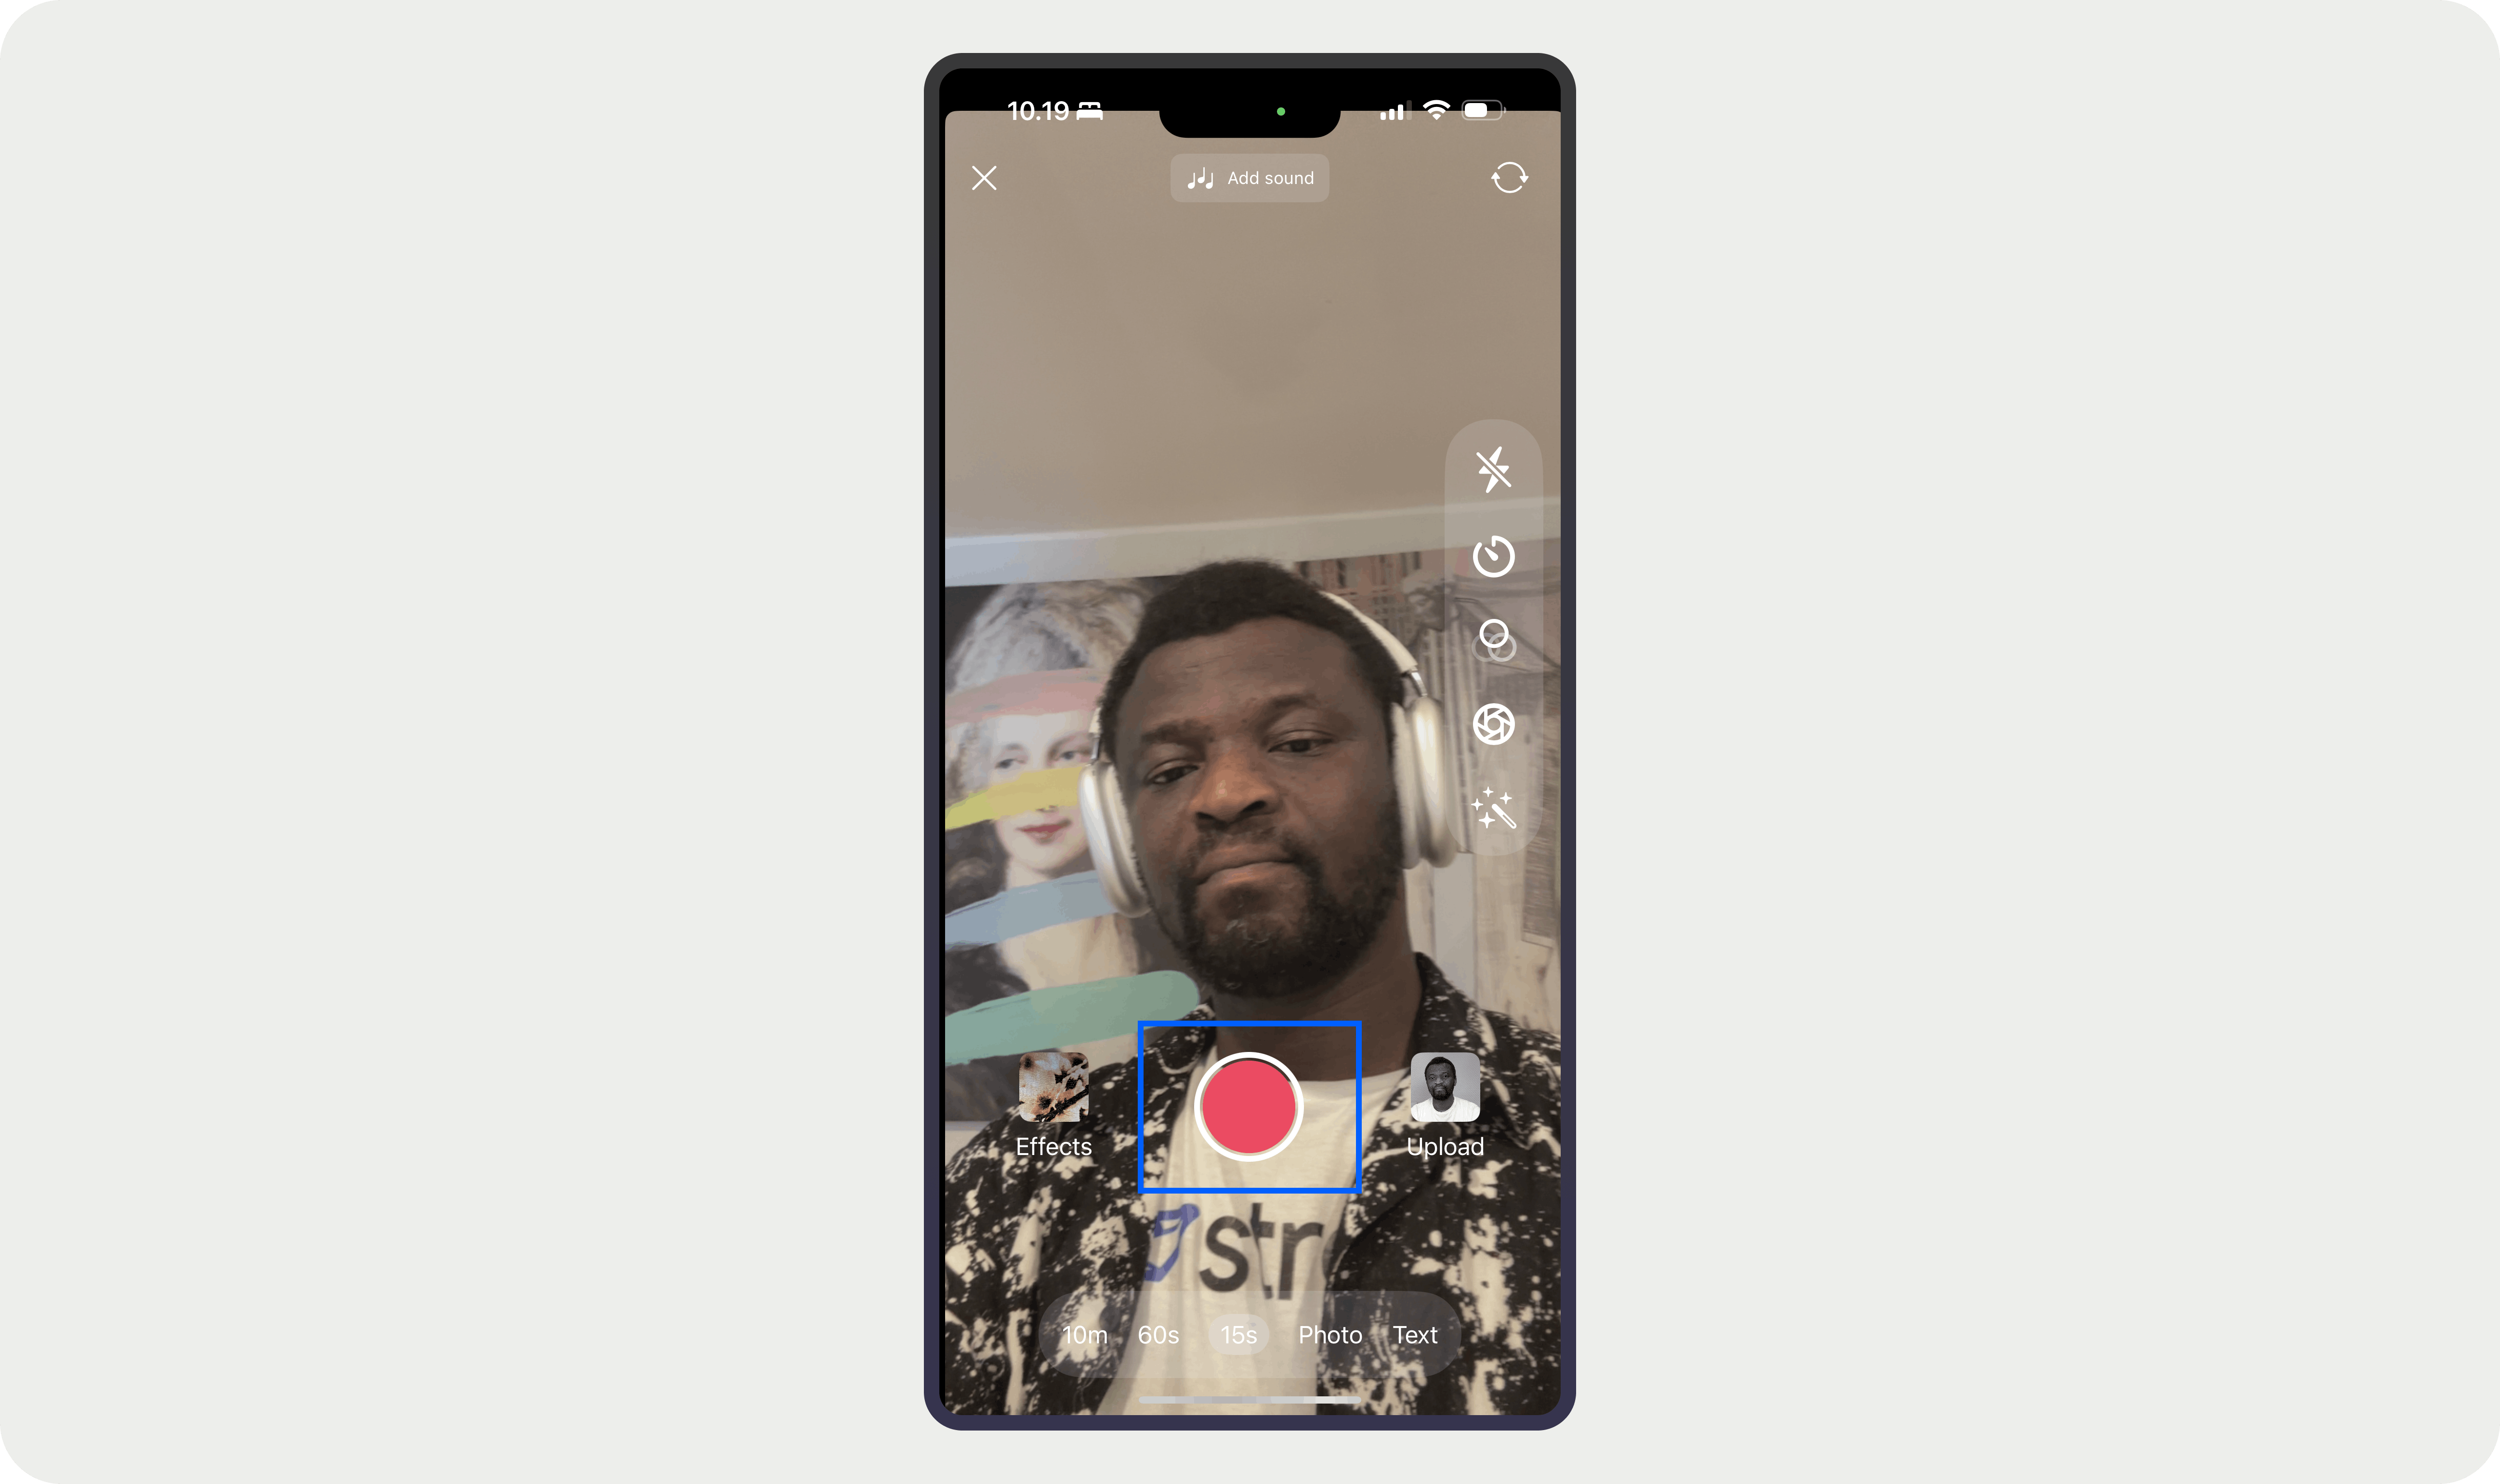 A video recording button overlaid on image of a man wearing an earphone